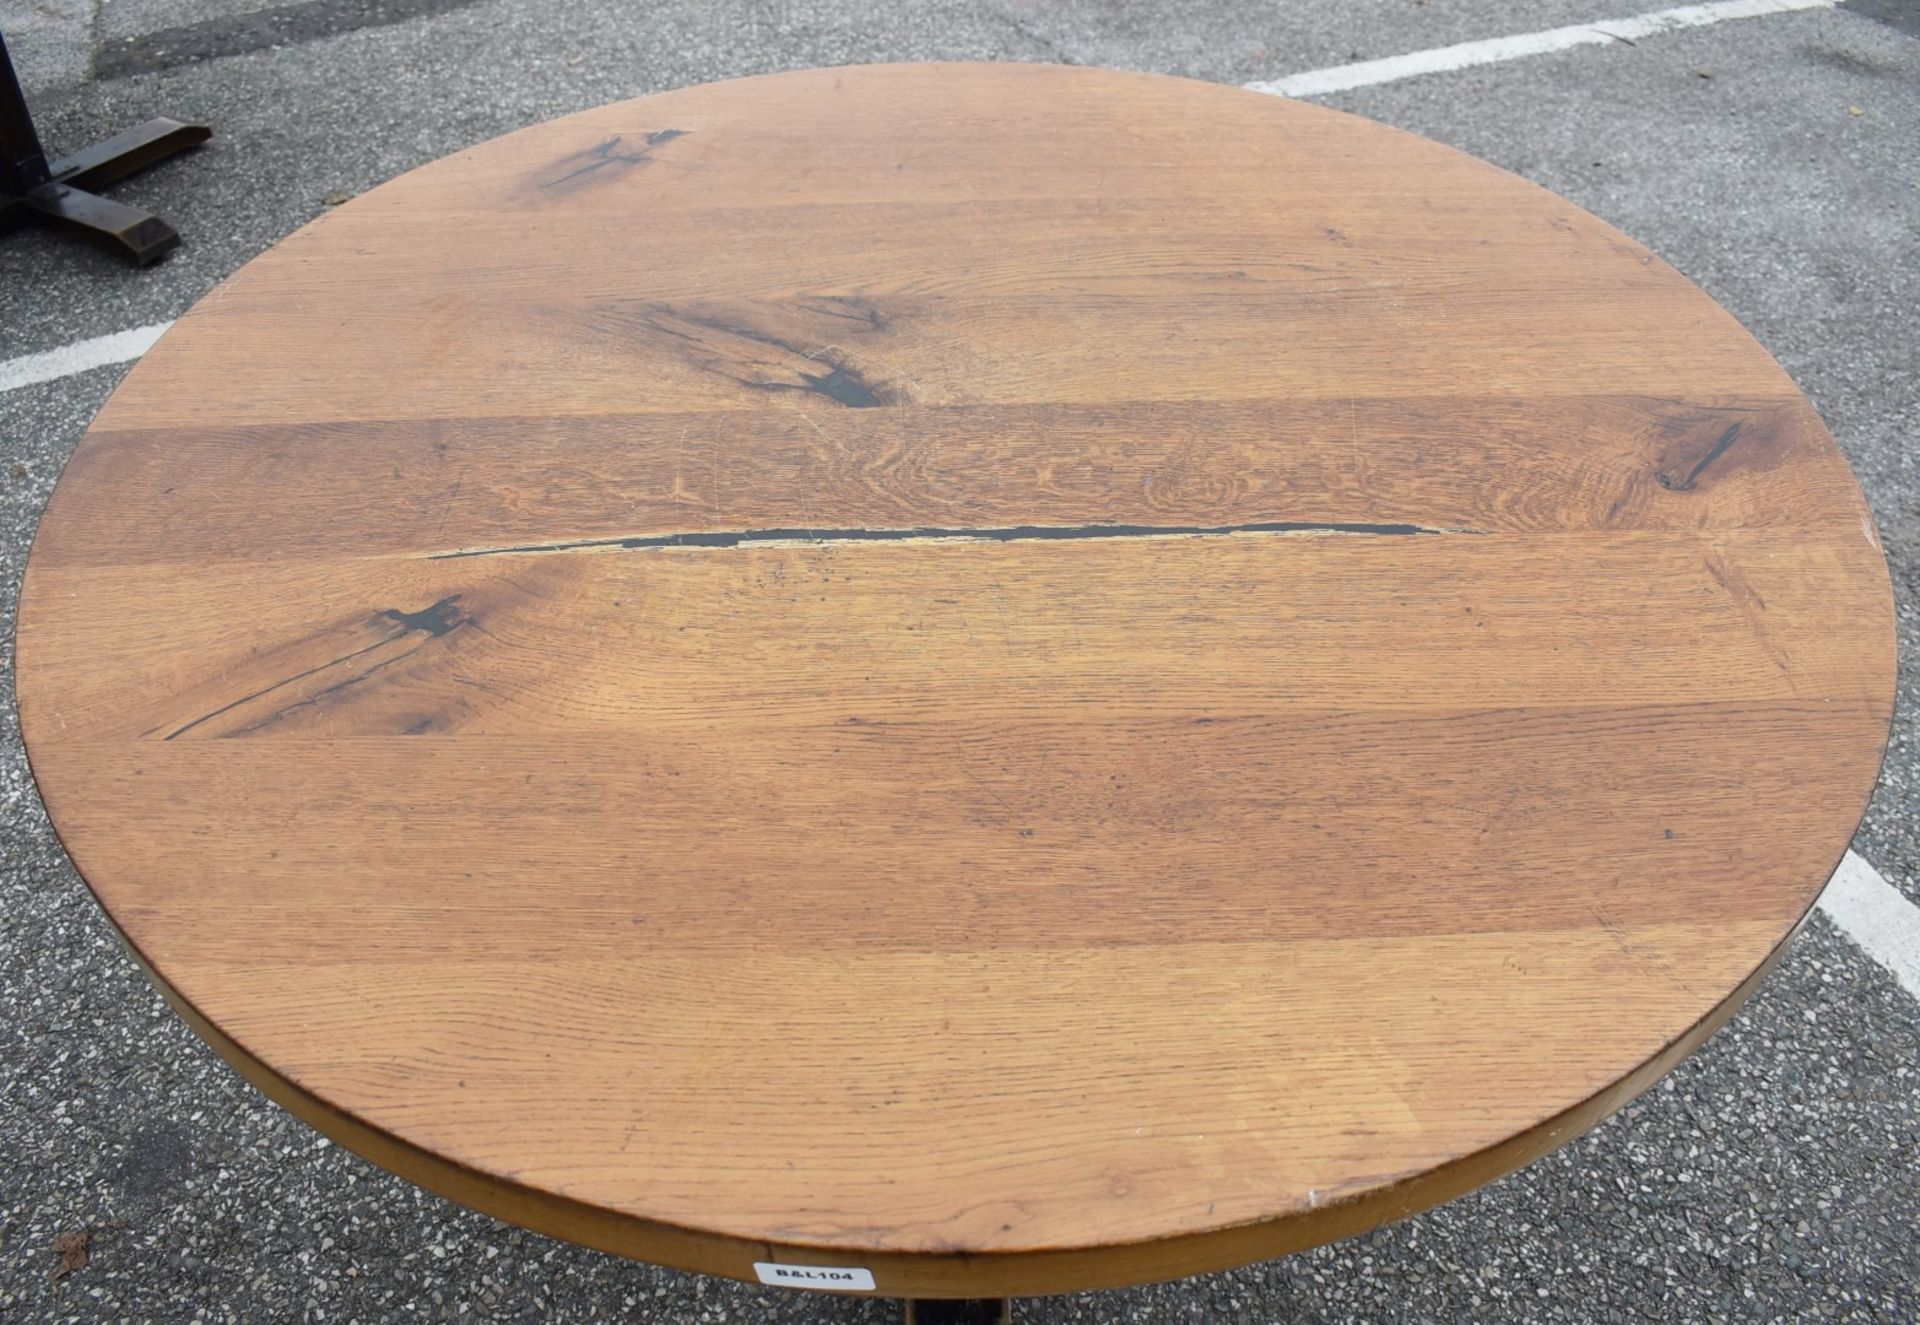 1 x Solid Oak 120cm Round Restaurant Table - Natural Rustic Knotty Oak Tops With Rustic Timber Base - Image 4 of 6